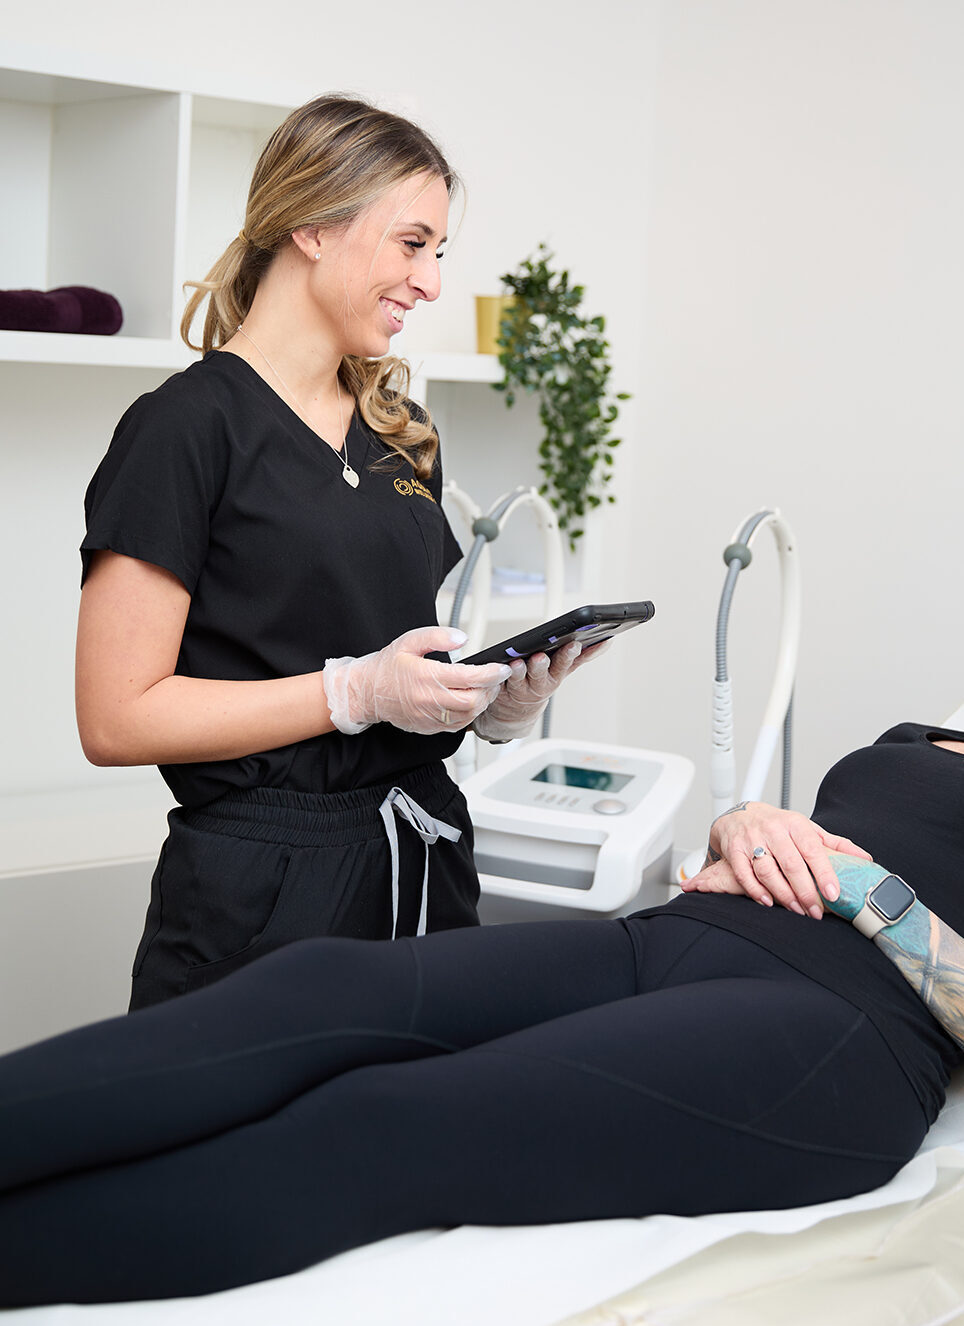 a female therapist wearing black scrubs is holding an ipad and talking to a client on a treatment bed, there is a radiofrequency facial device in the background